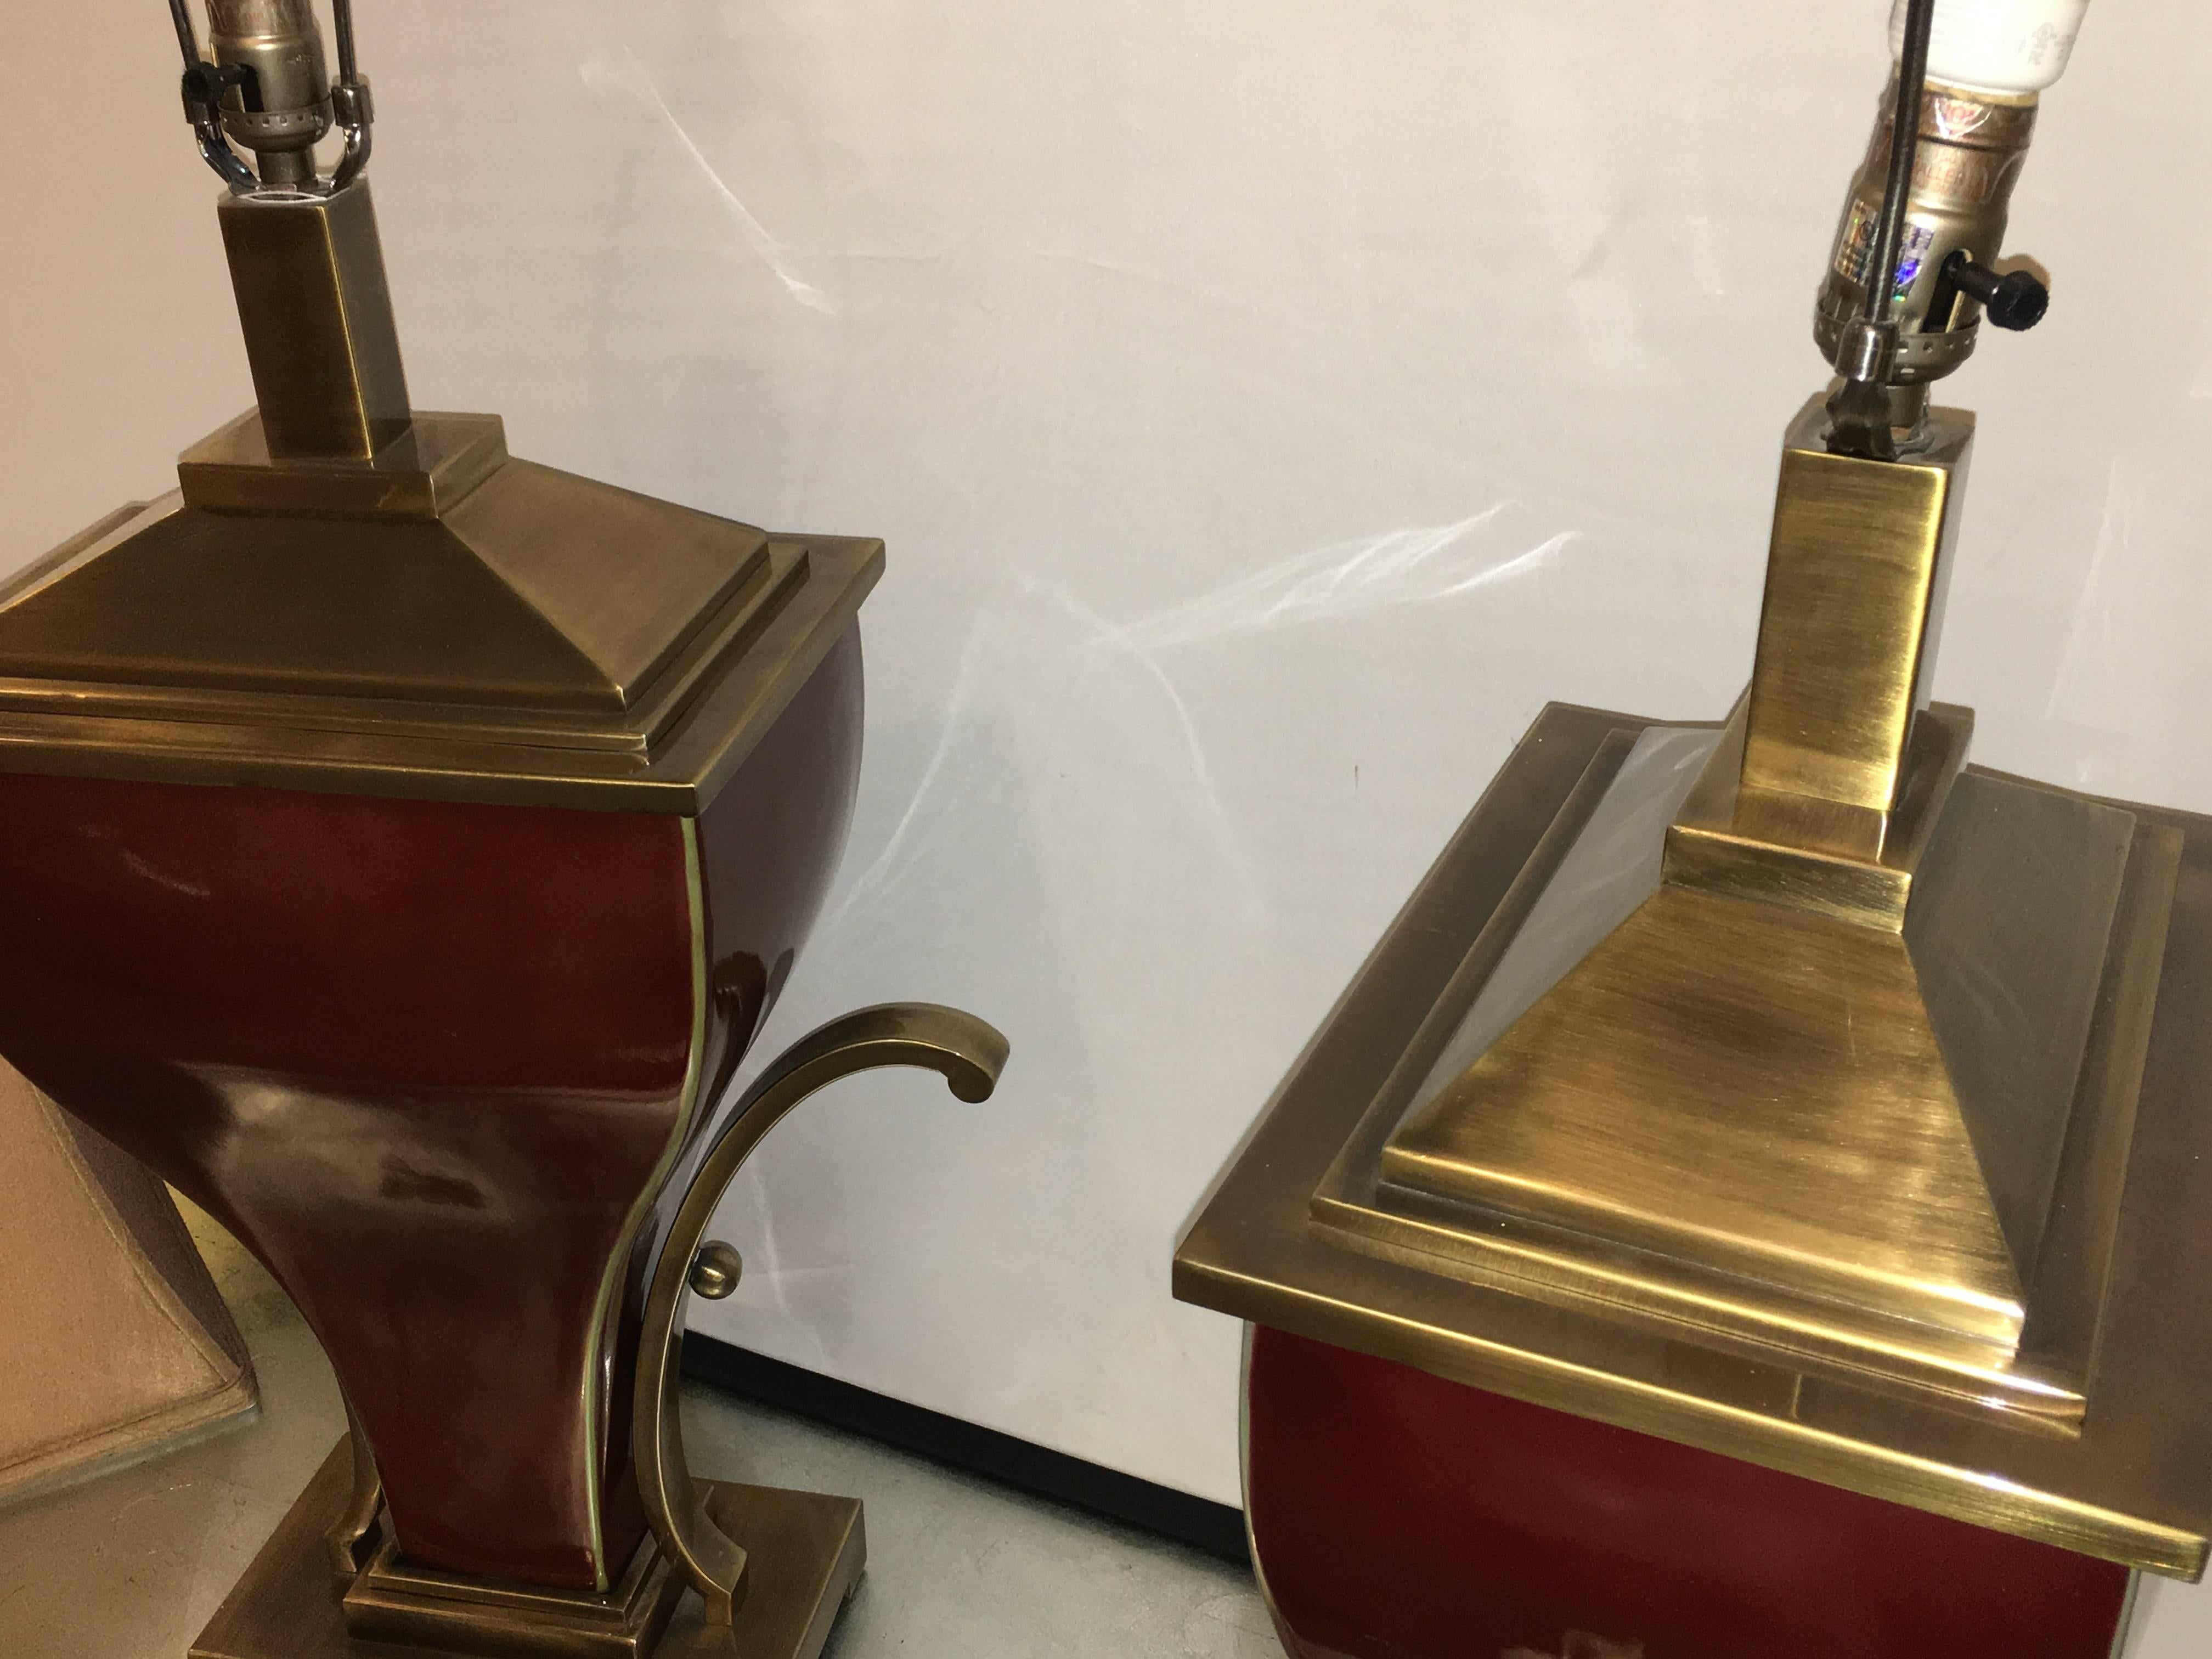 Pair of Art Deco Style Brass Mounted Porcelain Table Lamps In Good Condition For Sale In Stamford, CT